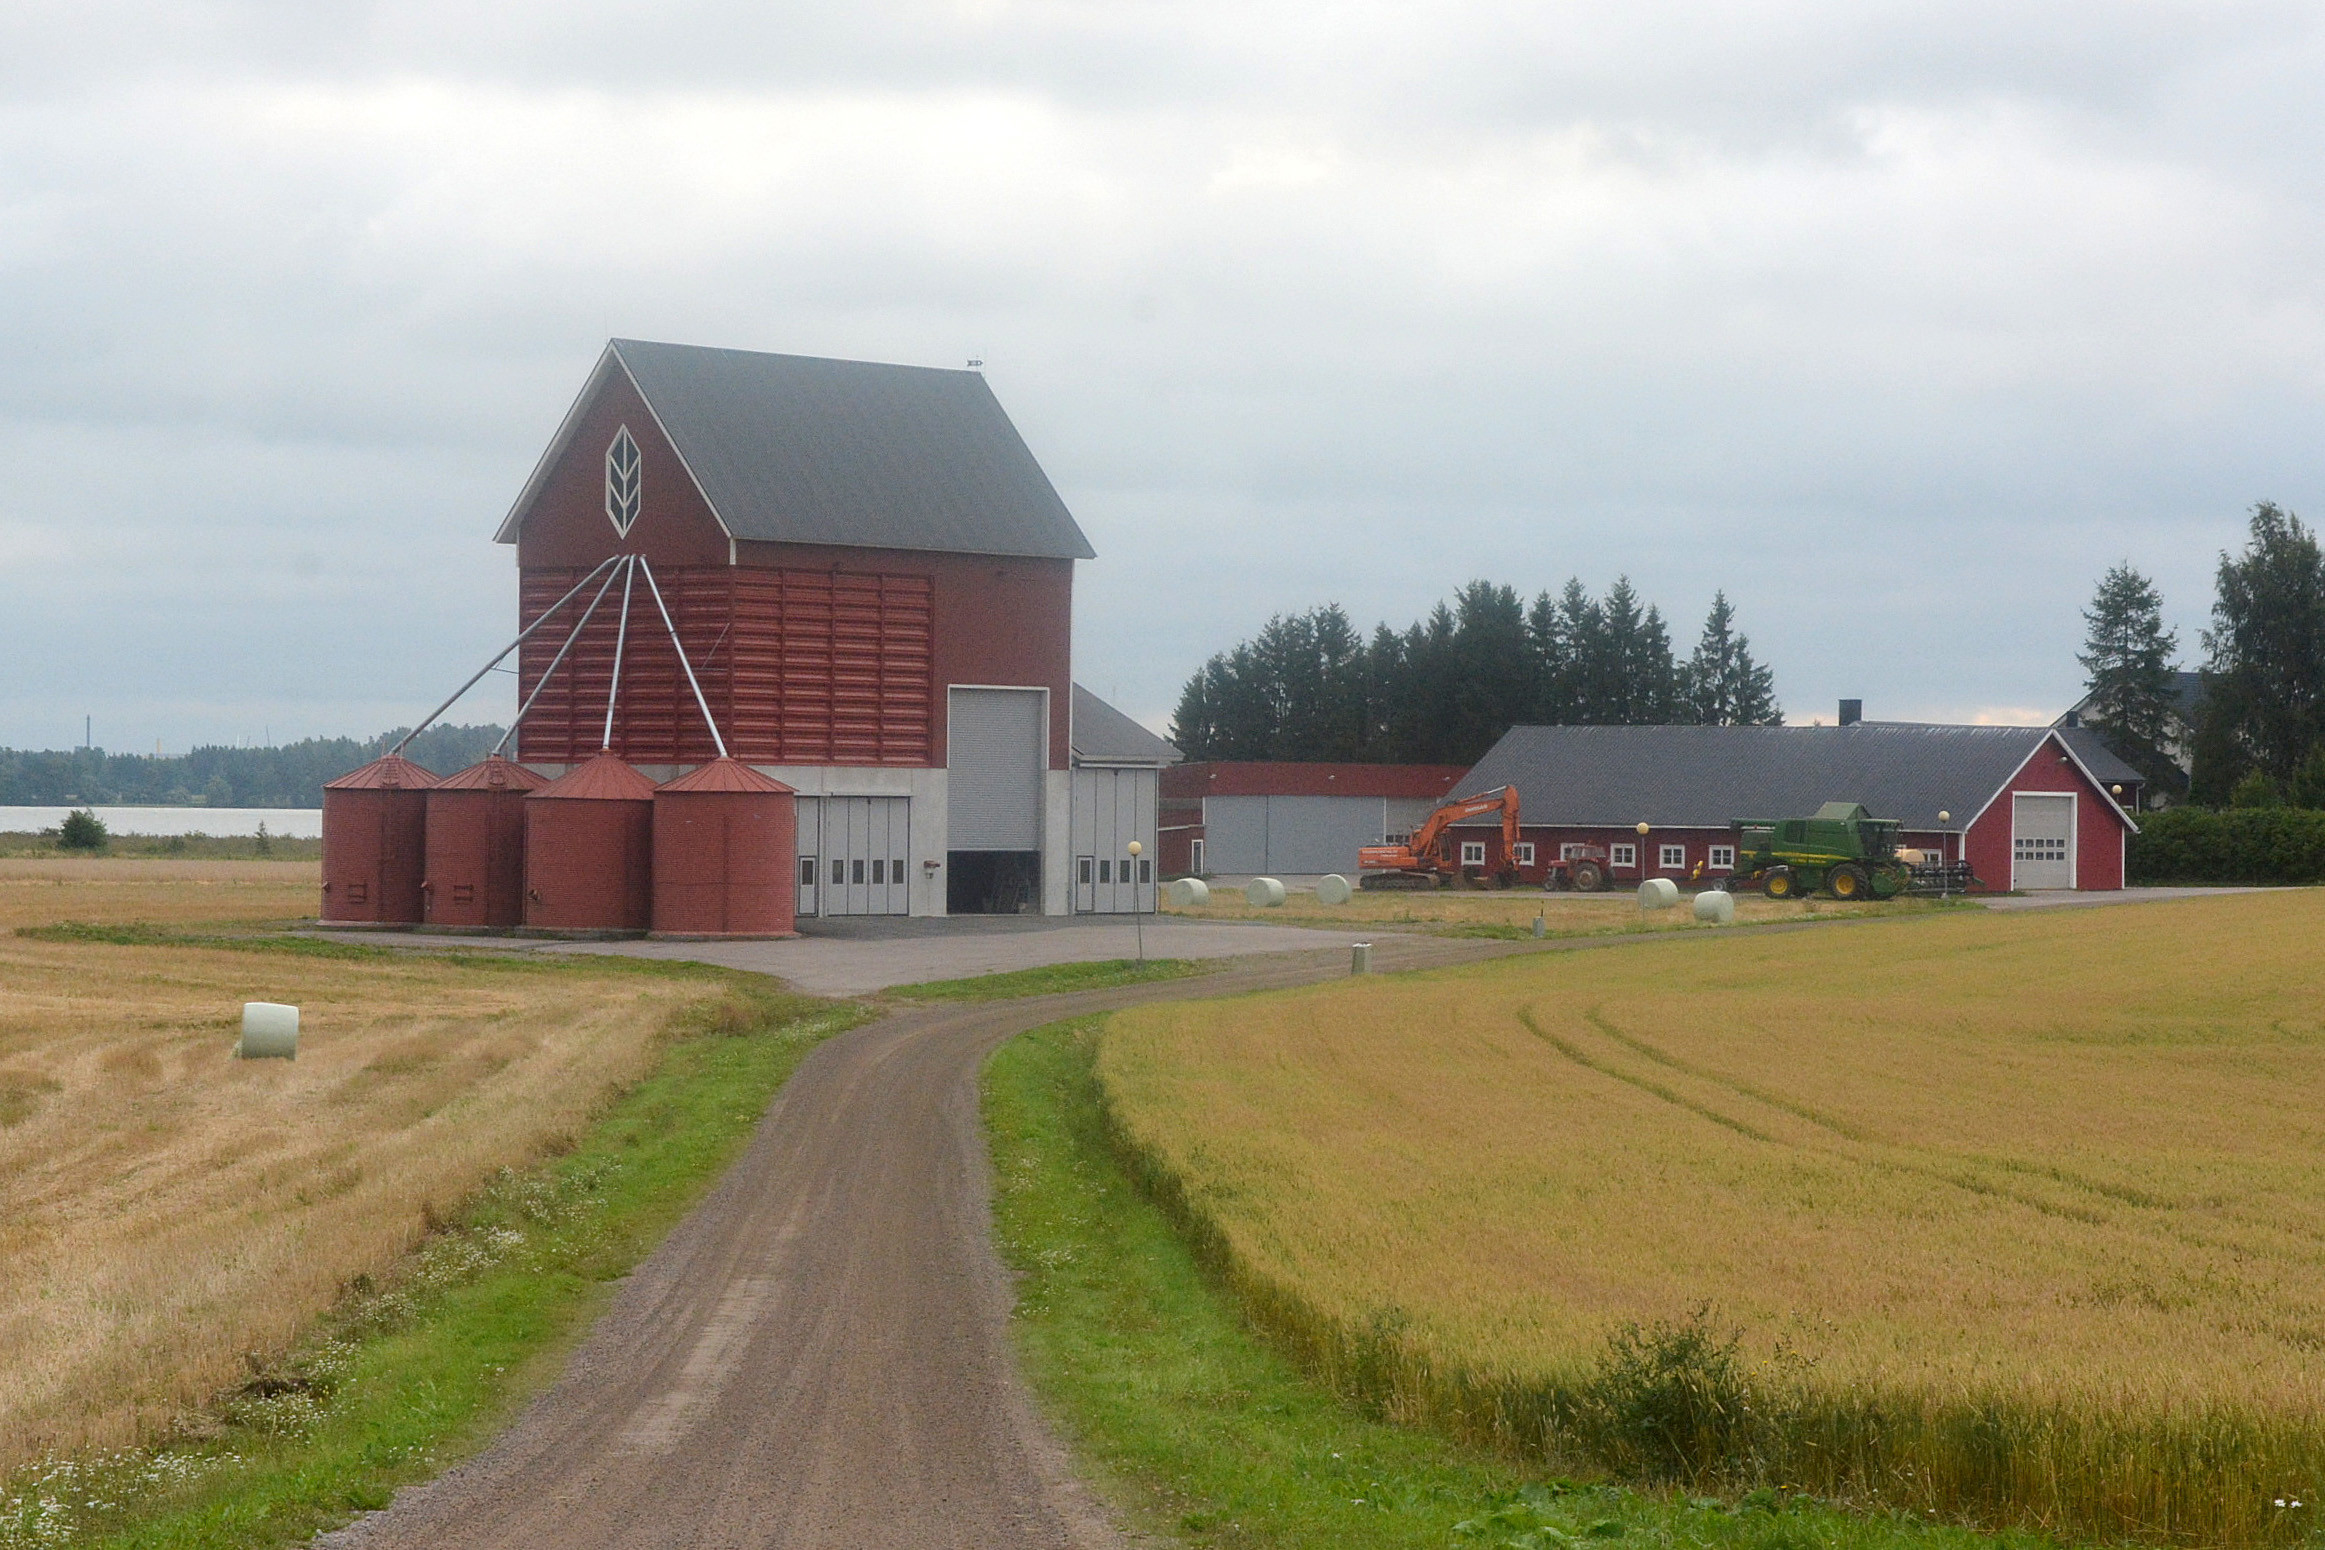 The Riola brothers farm 250 hectares of crops in Finland. Photo: Chris McCullough